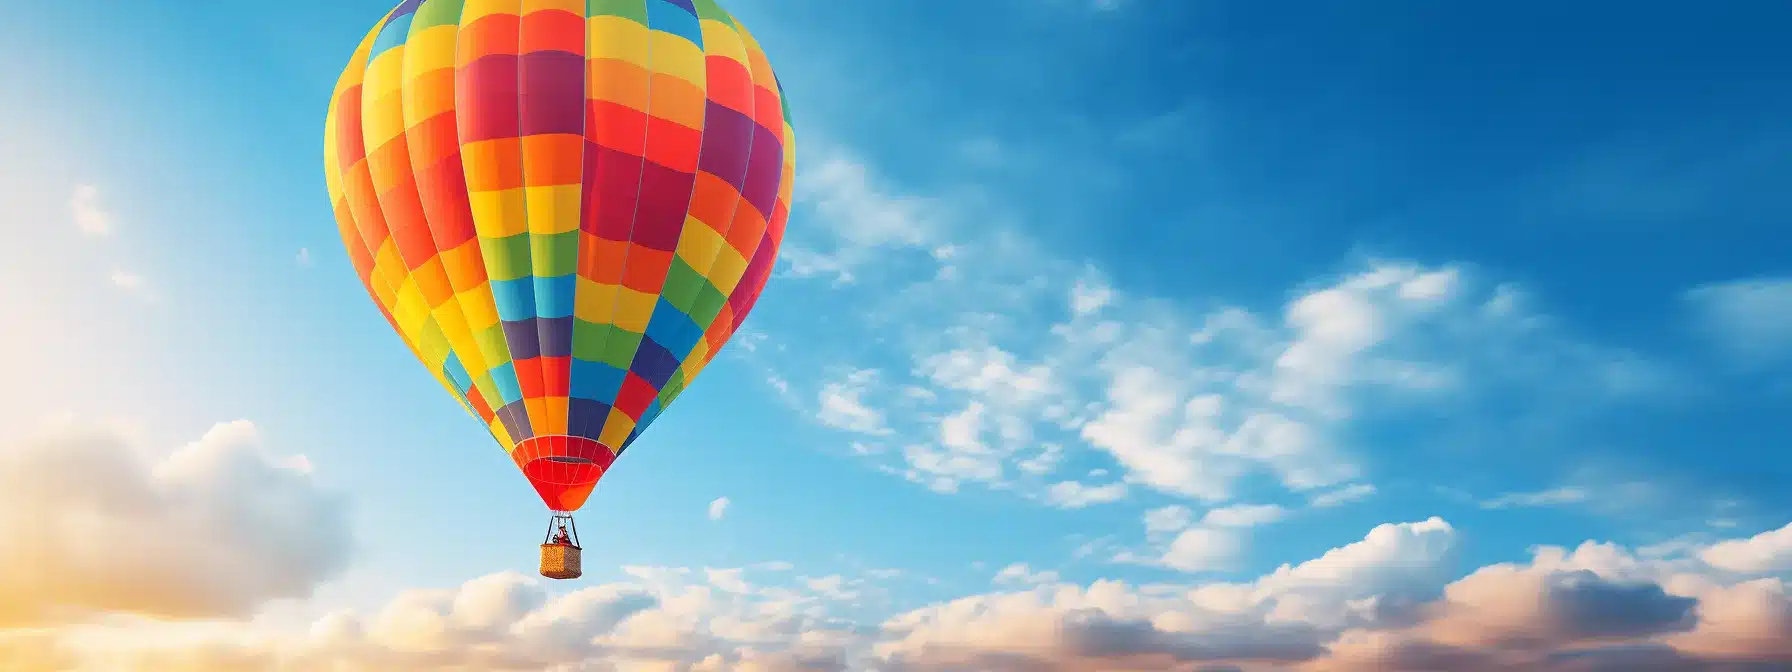 A Colorful Hot Air Balloon Rises In The Sky, Symbolizing Brand Positioning Fueling Business Growth.